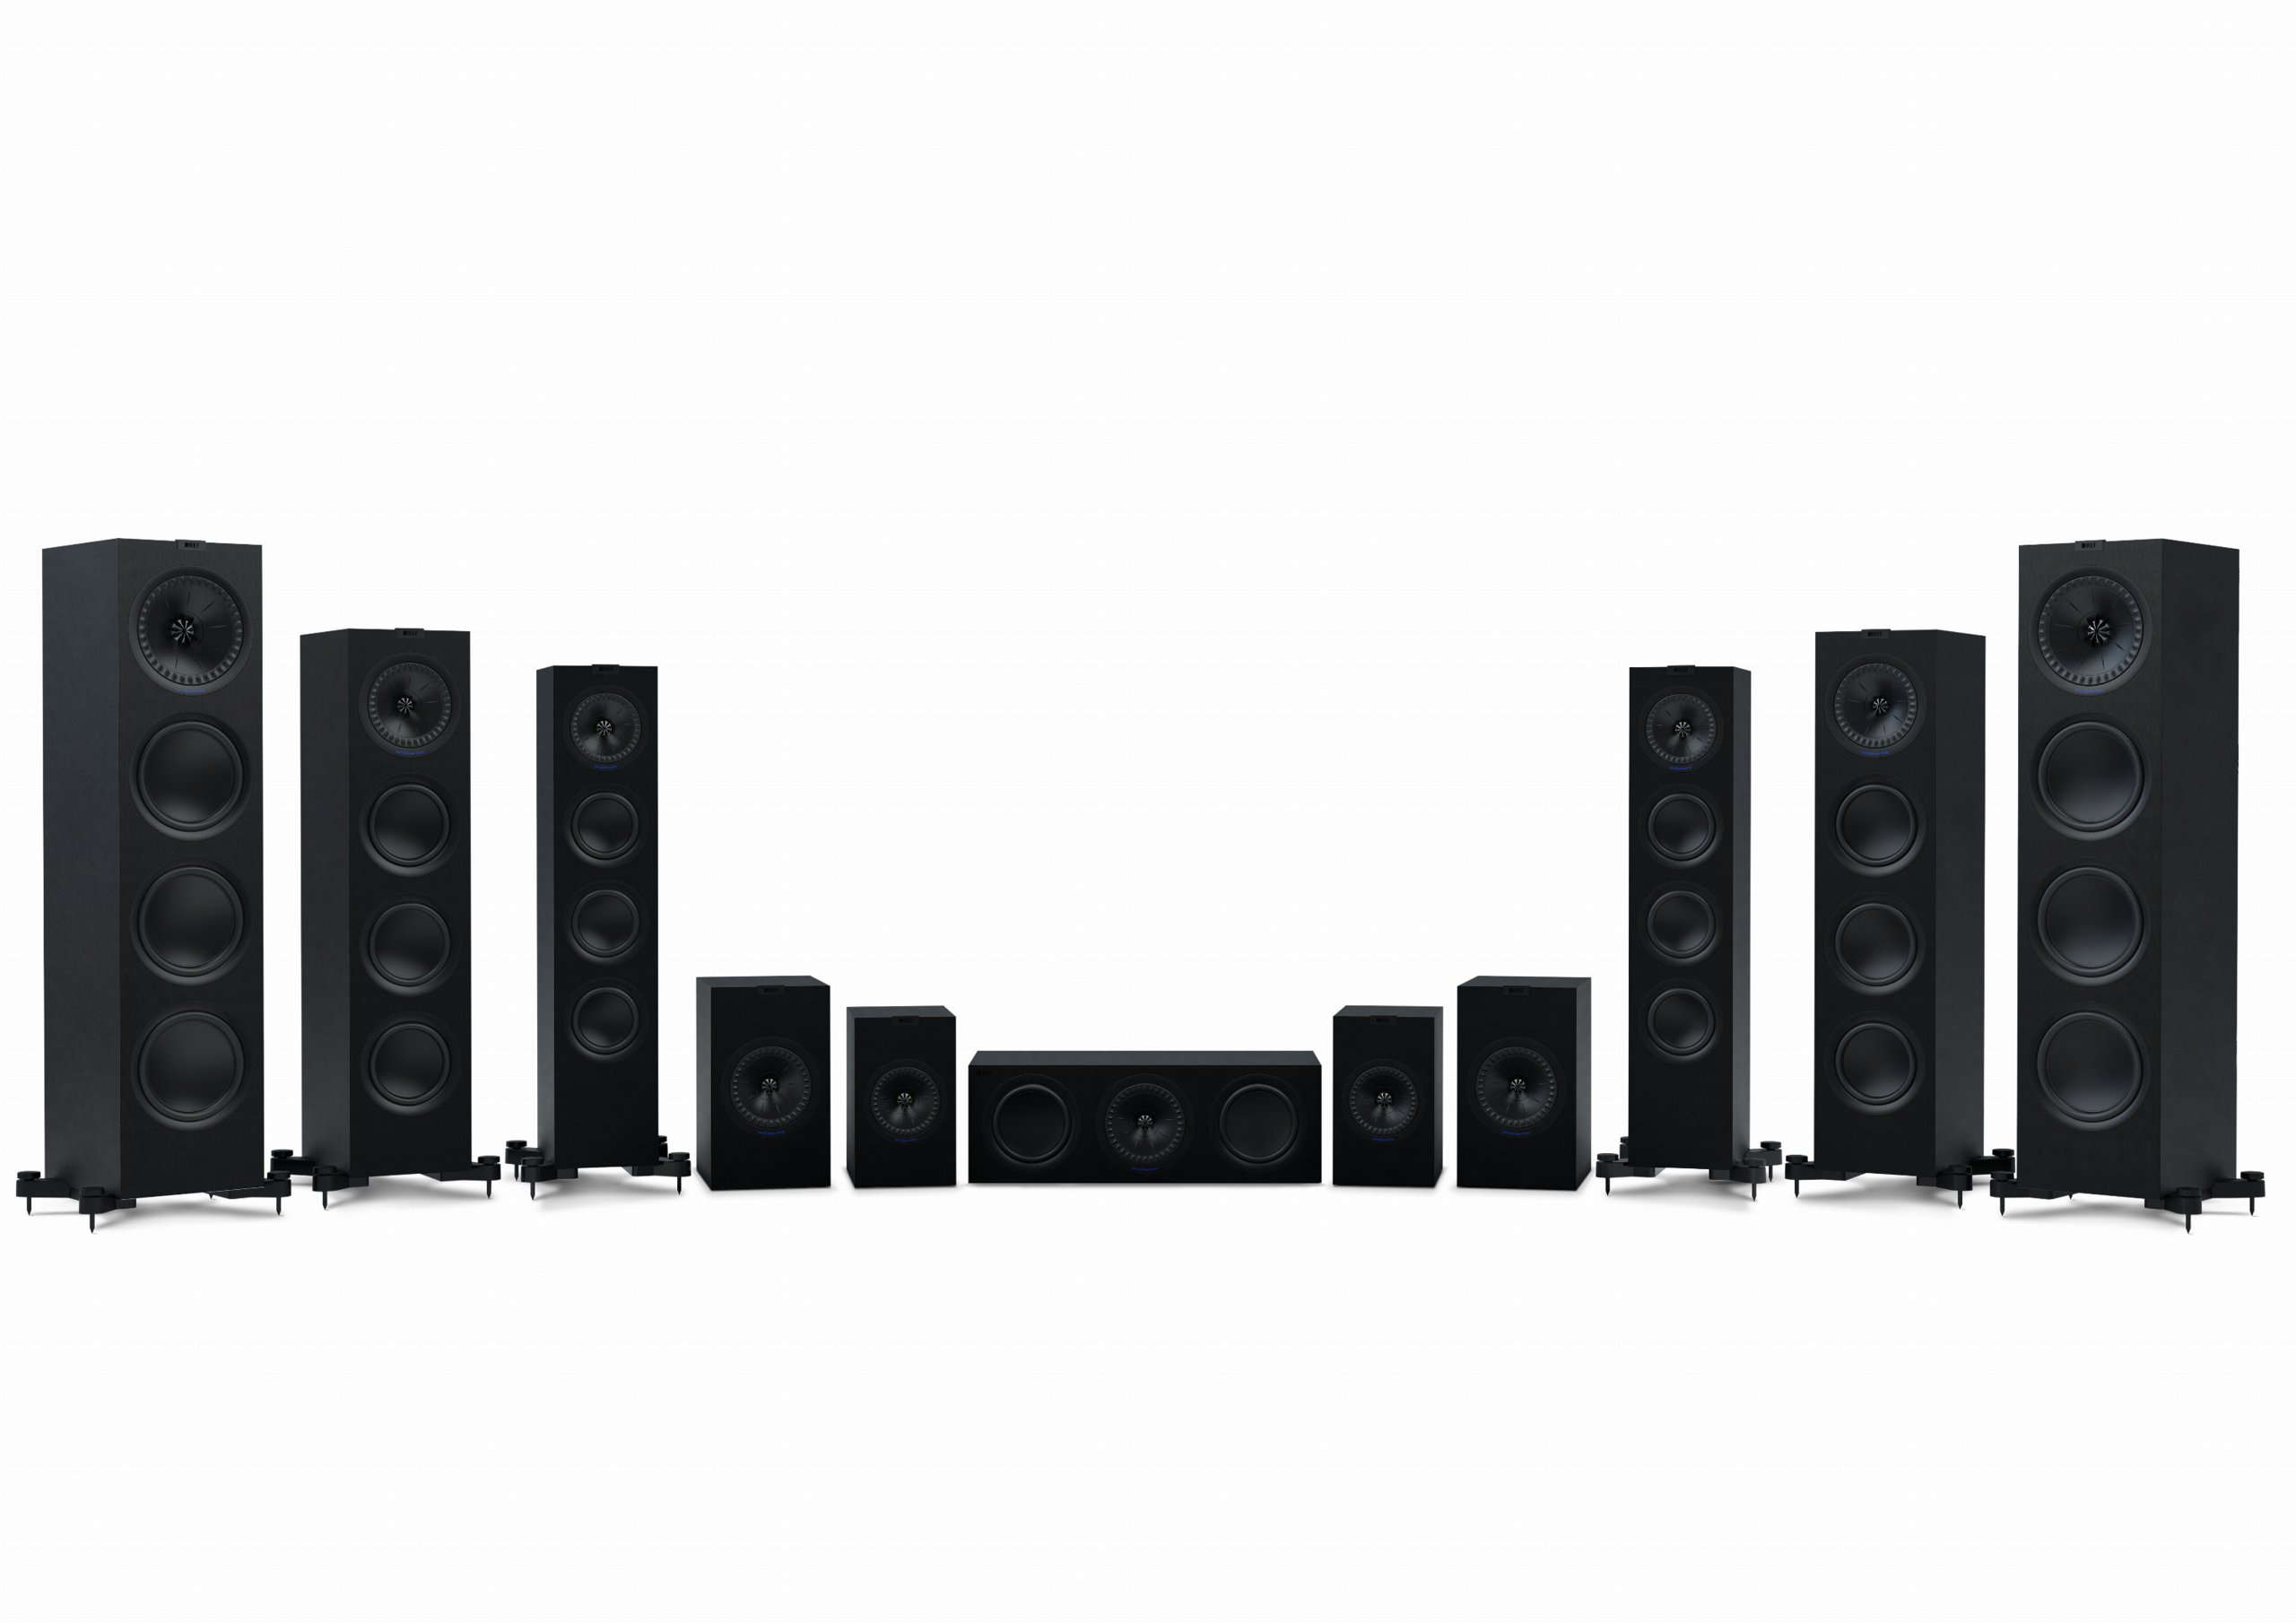 Post Banner for KEF Speaker Lineup: What Separates the REFERENCE, R Series, and Q Series Loudspeakers, and What May Be Their Applications?